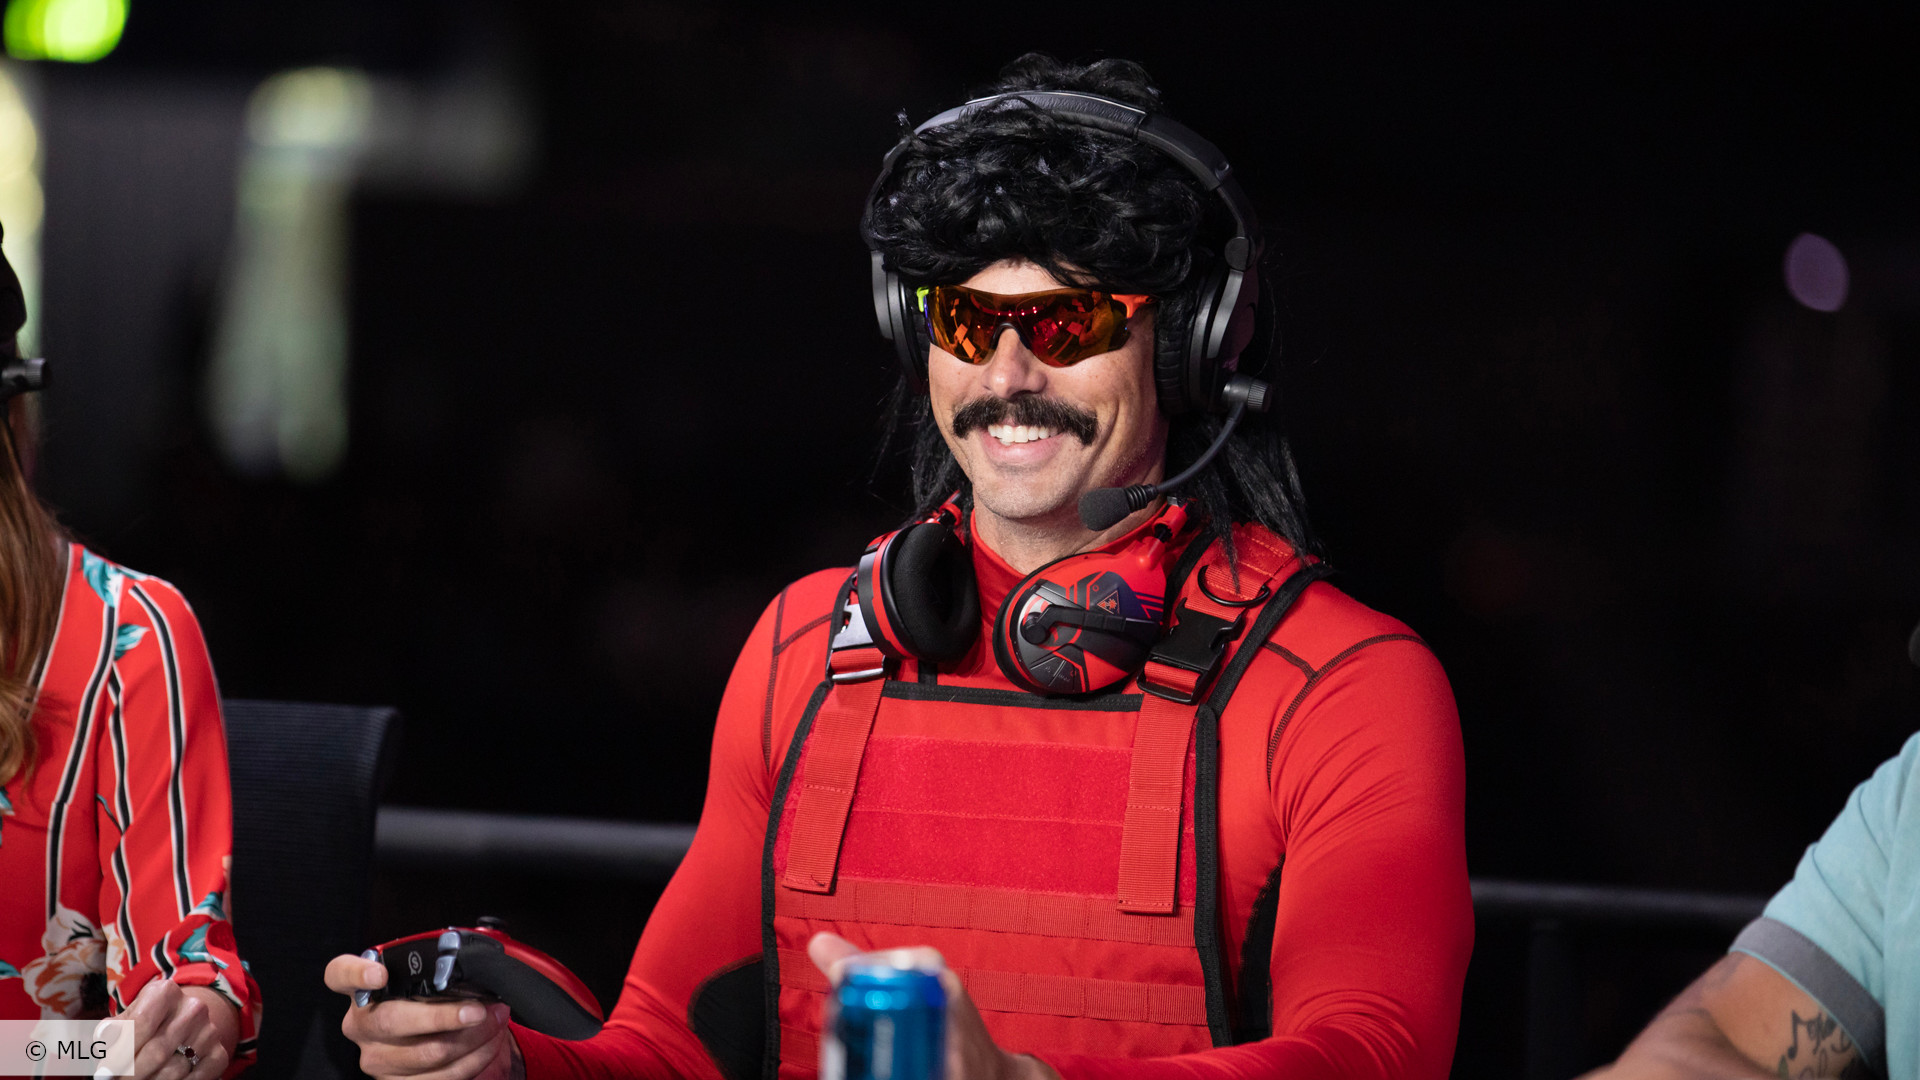 Who is Dr Disrespect? Net worth, settings, and more